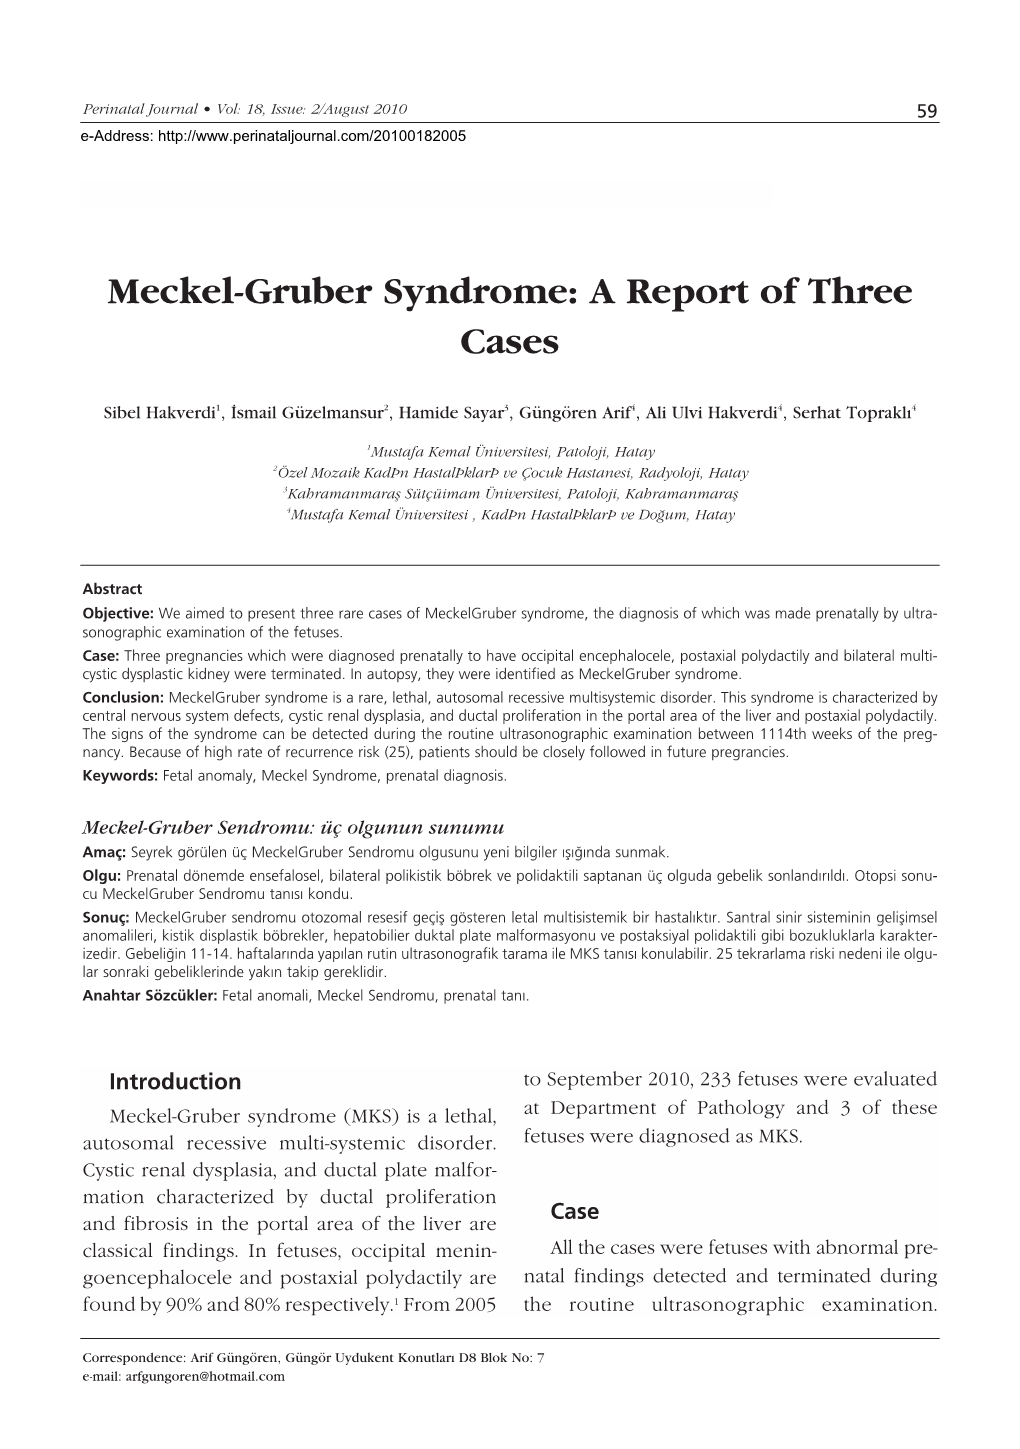 Meckel-Gruber Syndrome: a Report of Three Cases